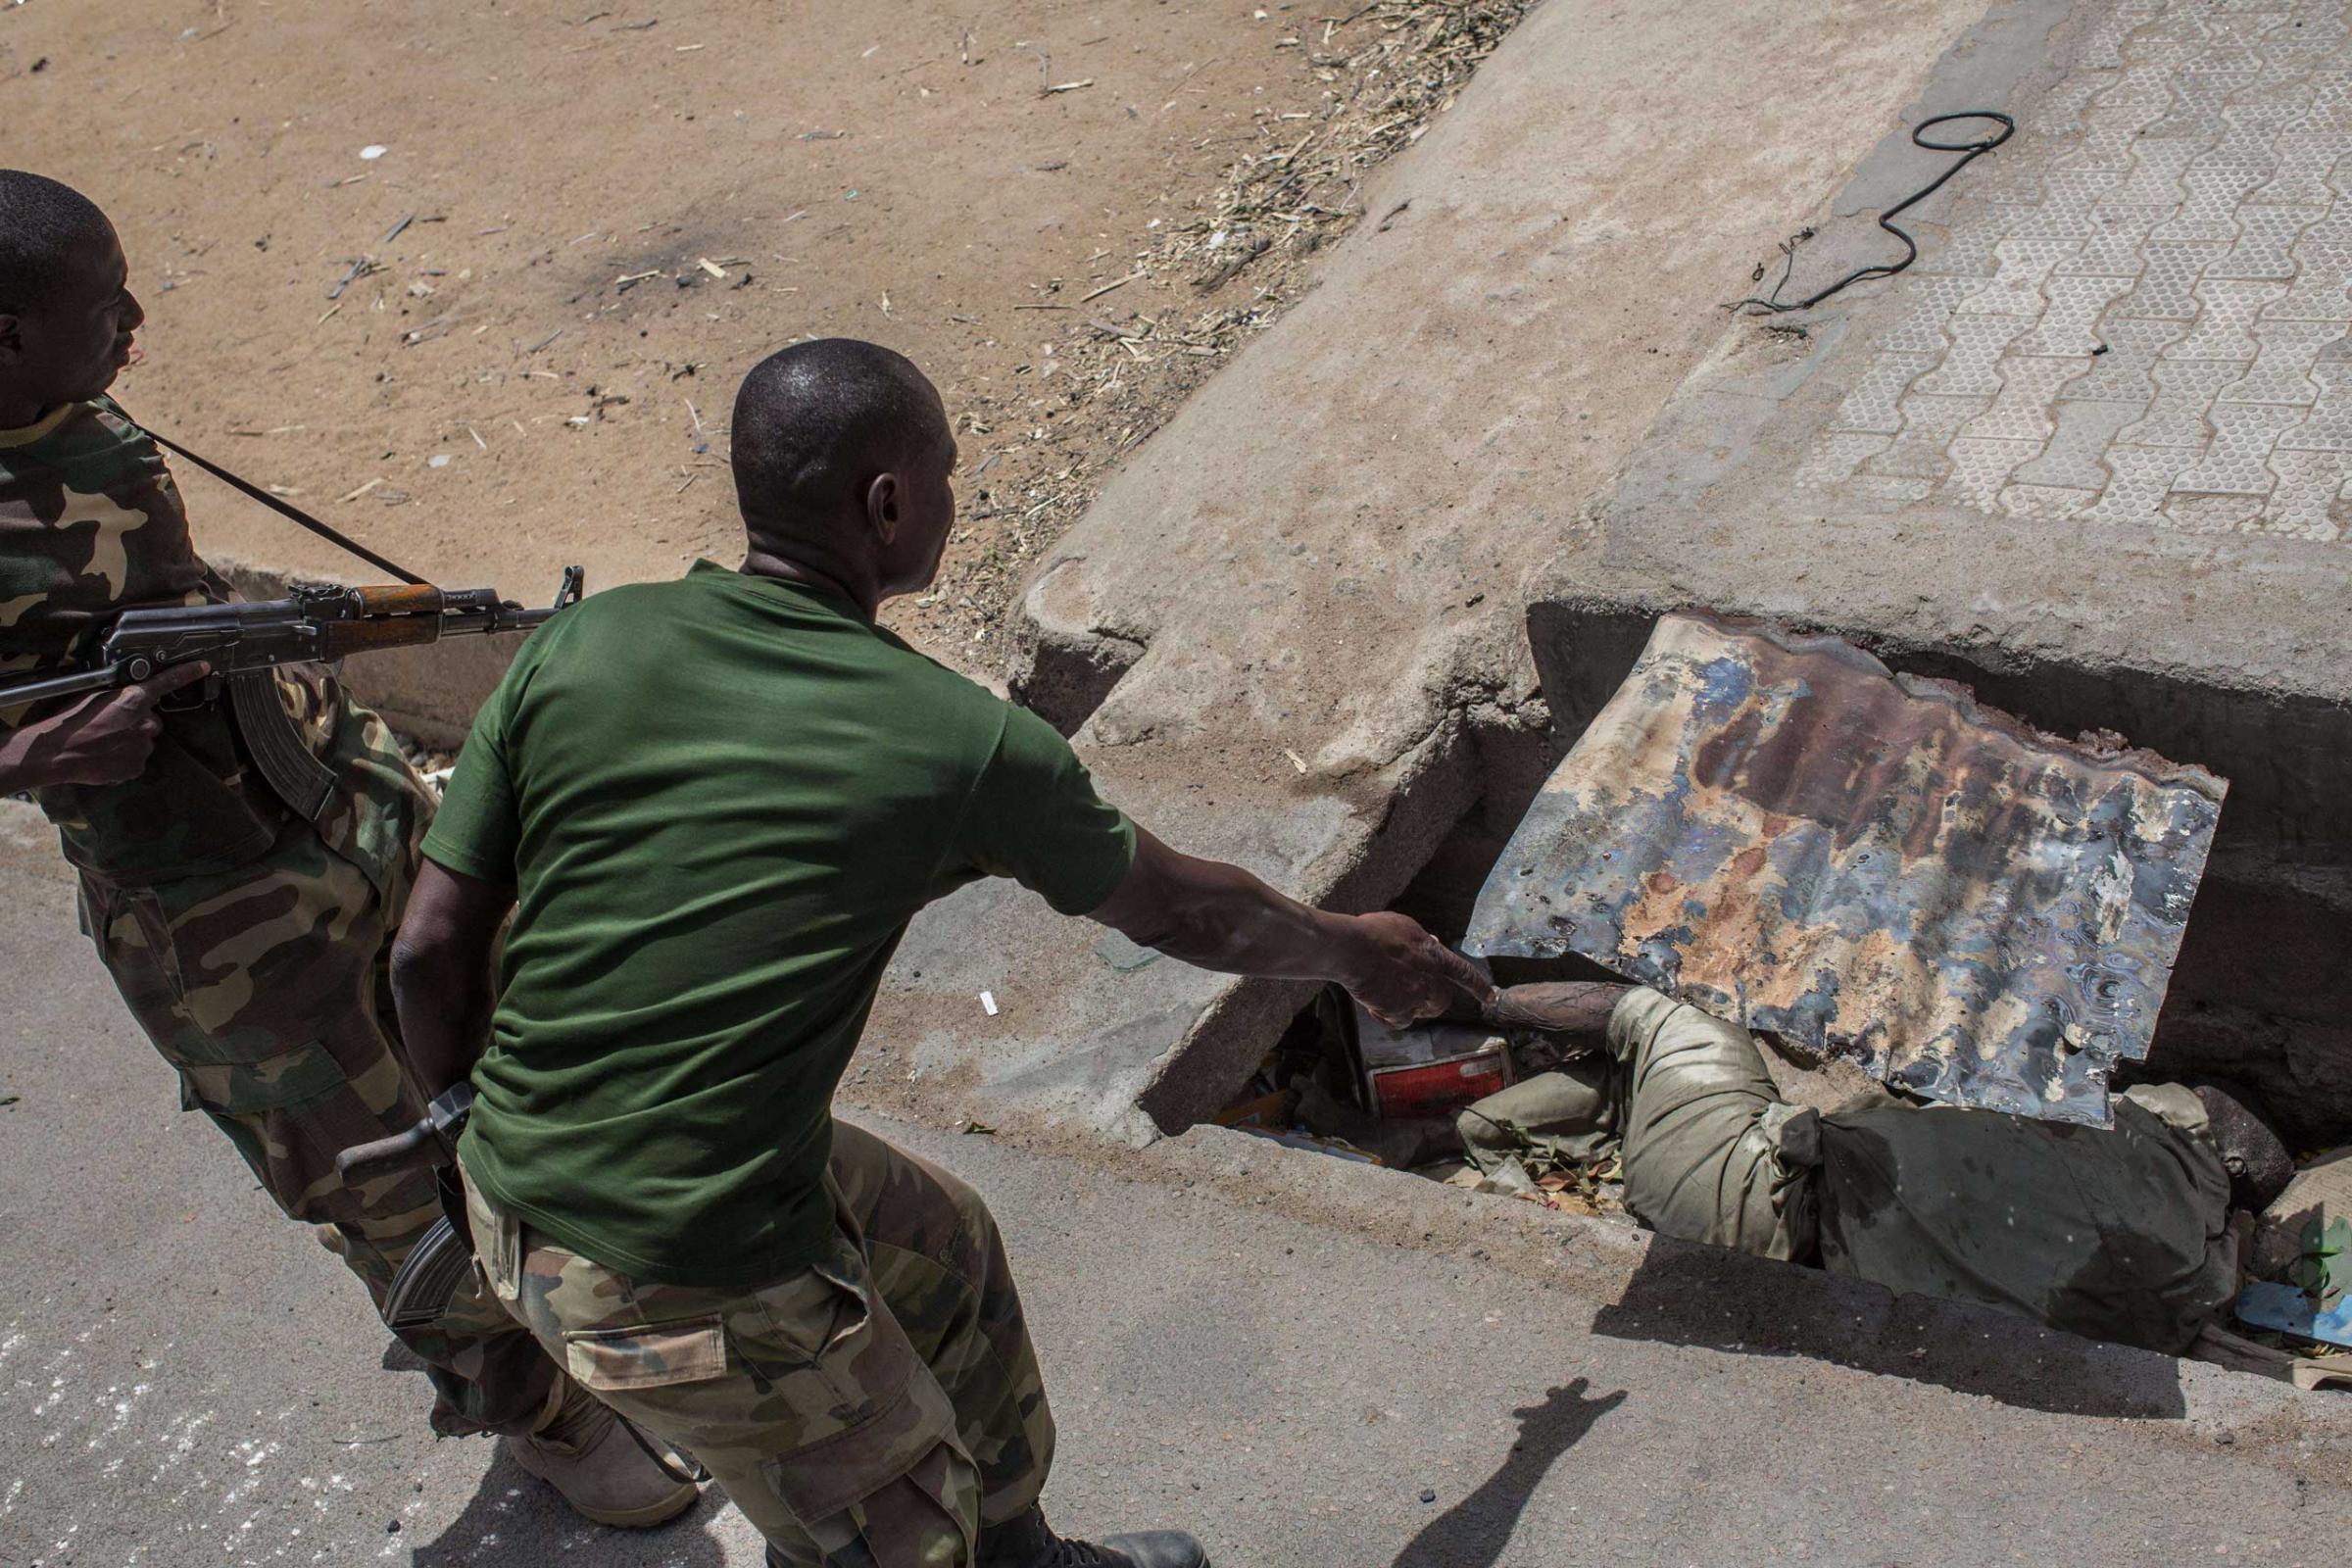 Members of the Nigerian army discover a body decomposing in a sewer in Bama on March 25, 2015.